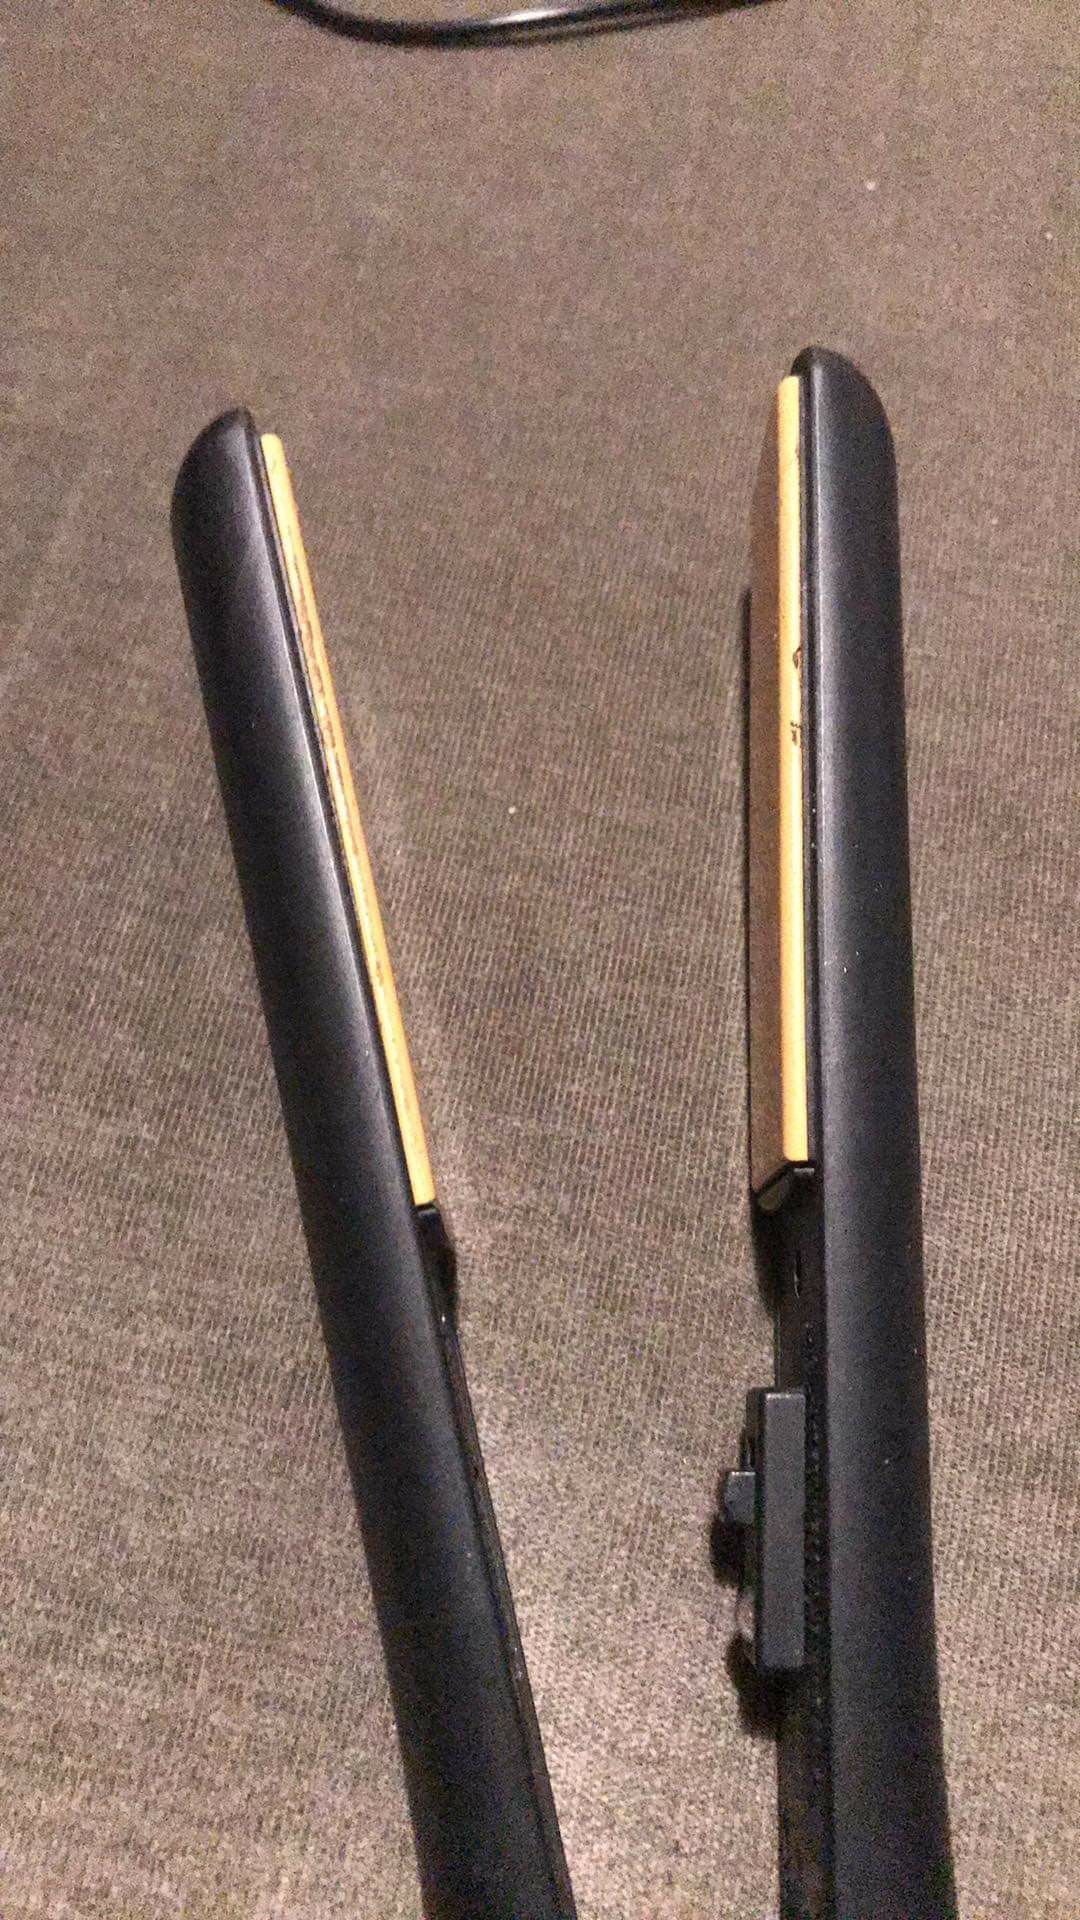 For sale global Beauty hair flat iron in good condition and shape working good